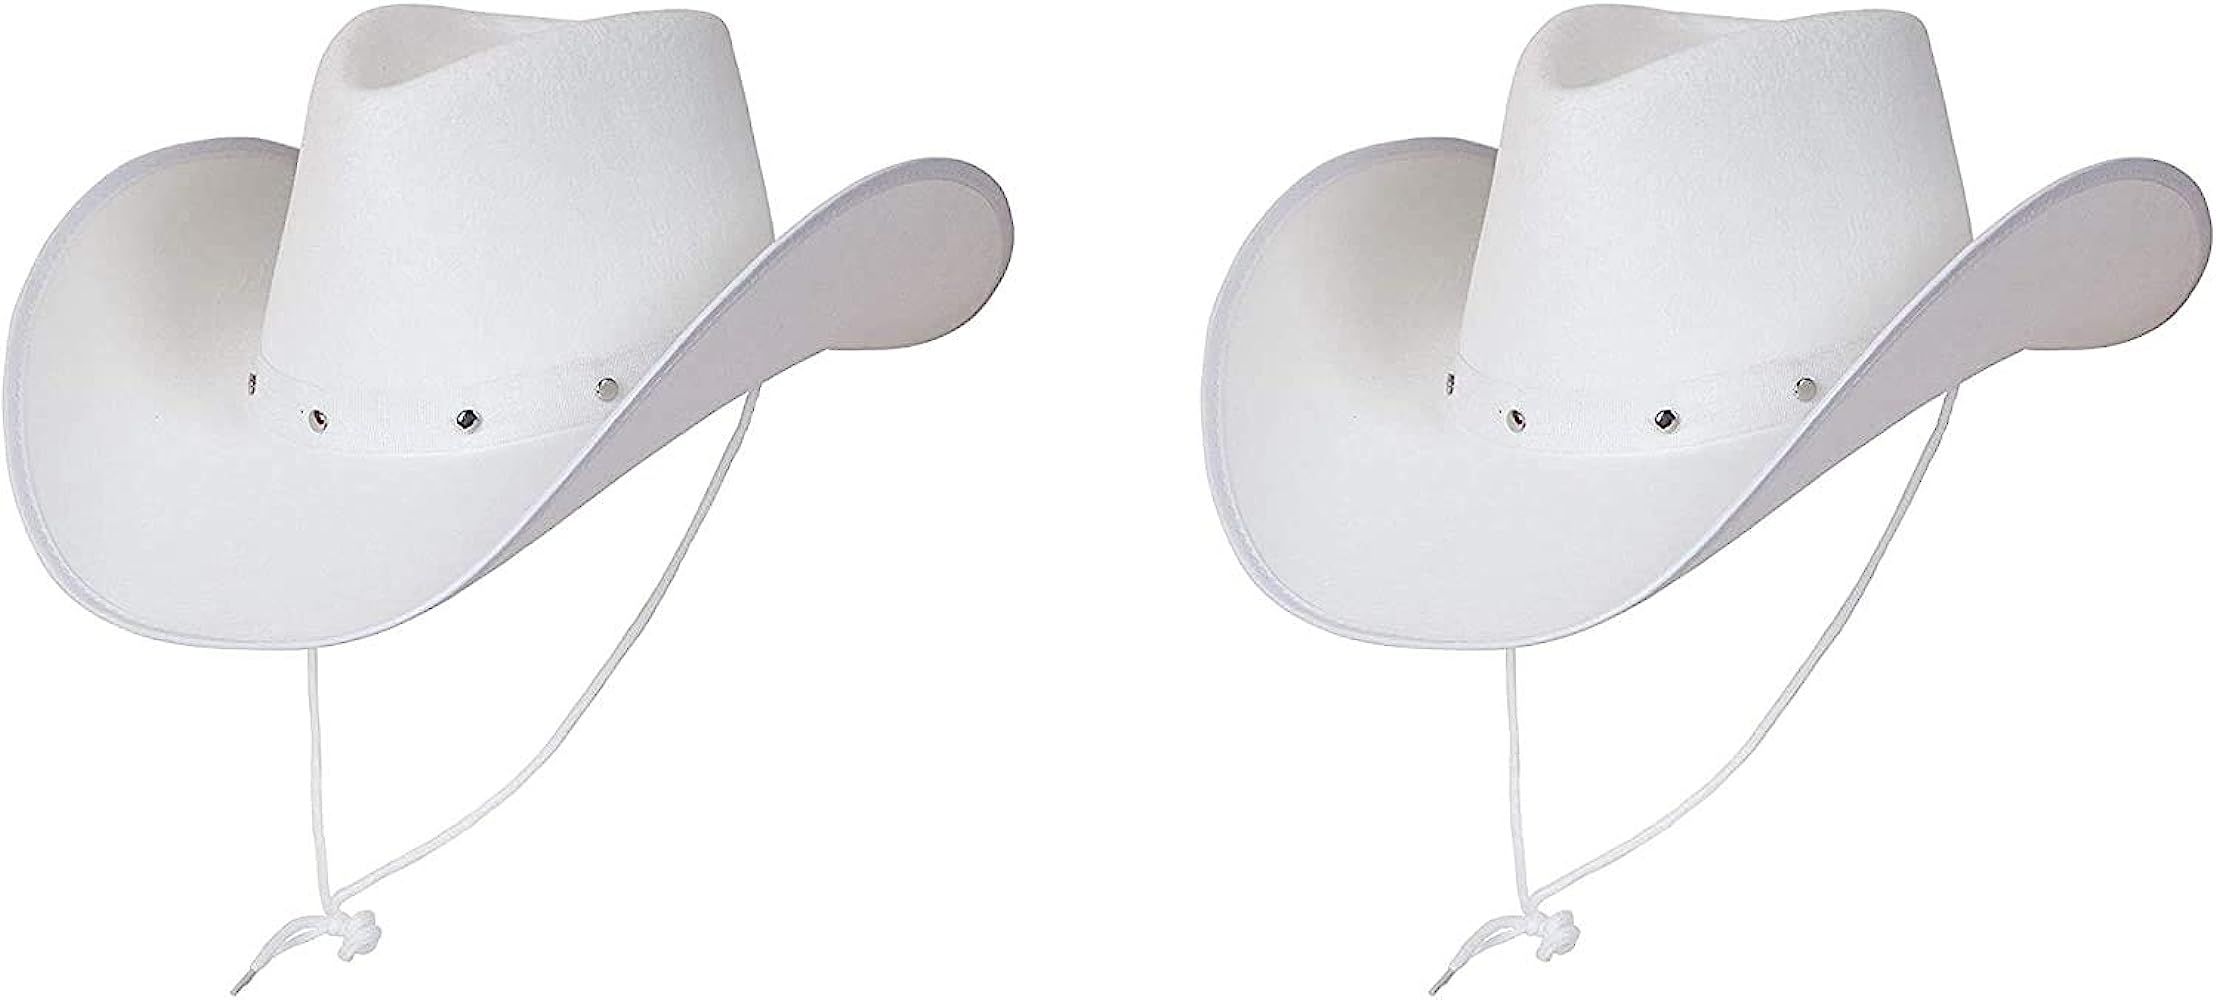 Wicked Costumes Adult Texan Cowboy Hat White 2 Pack Fancy Dress Party Accessory Wild Western Sher... | Amazon (US)